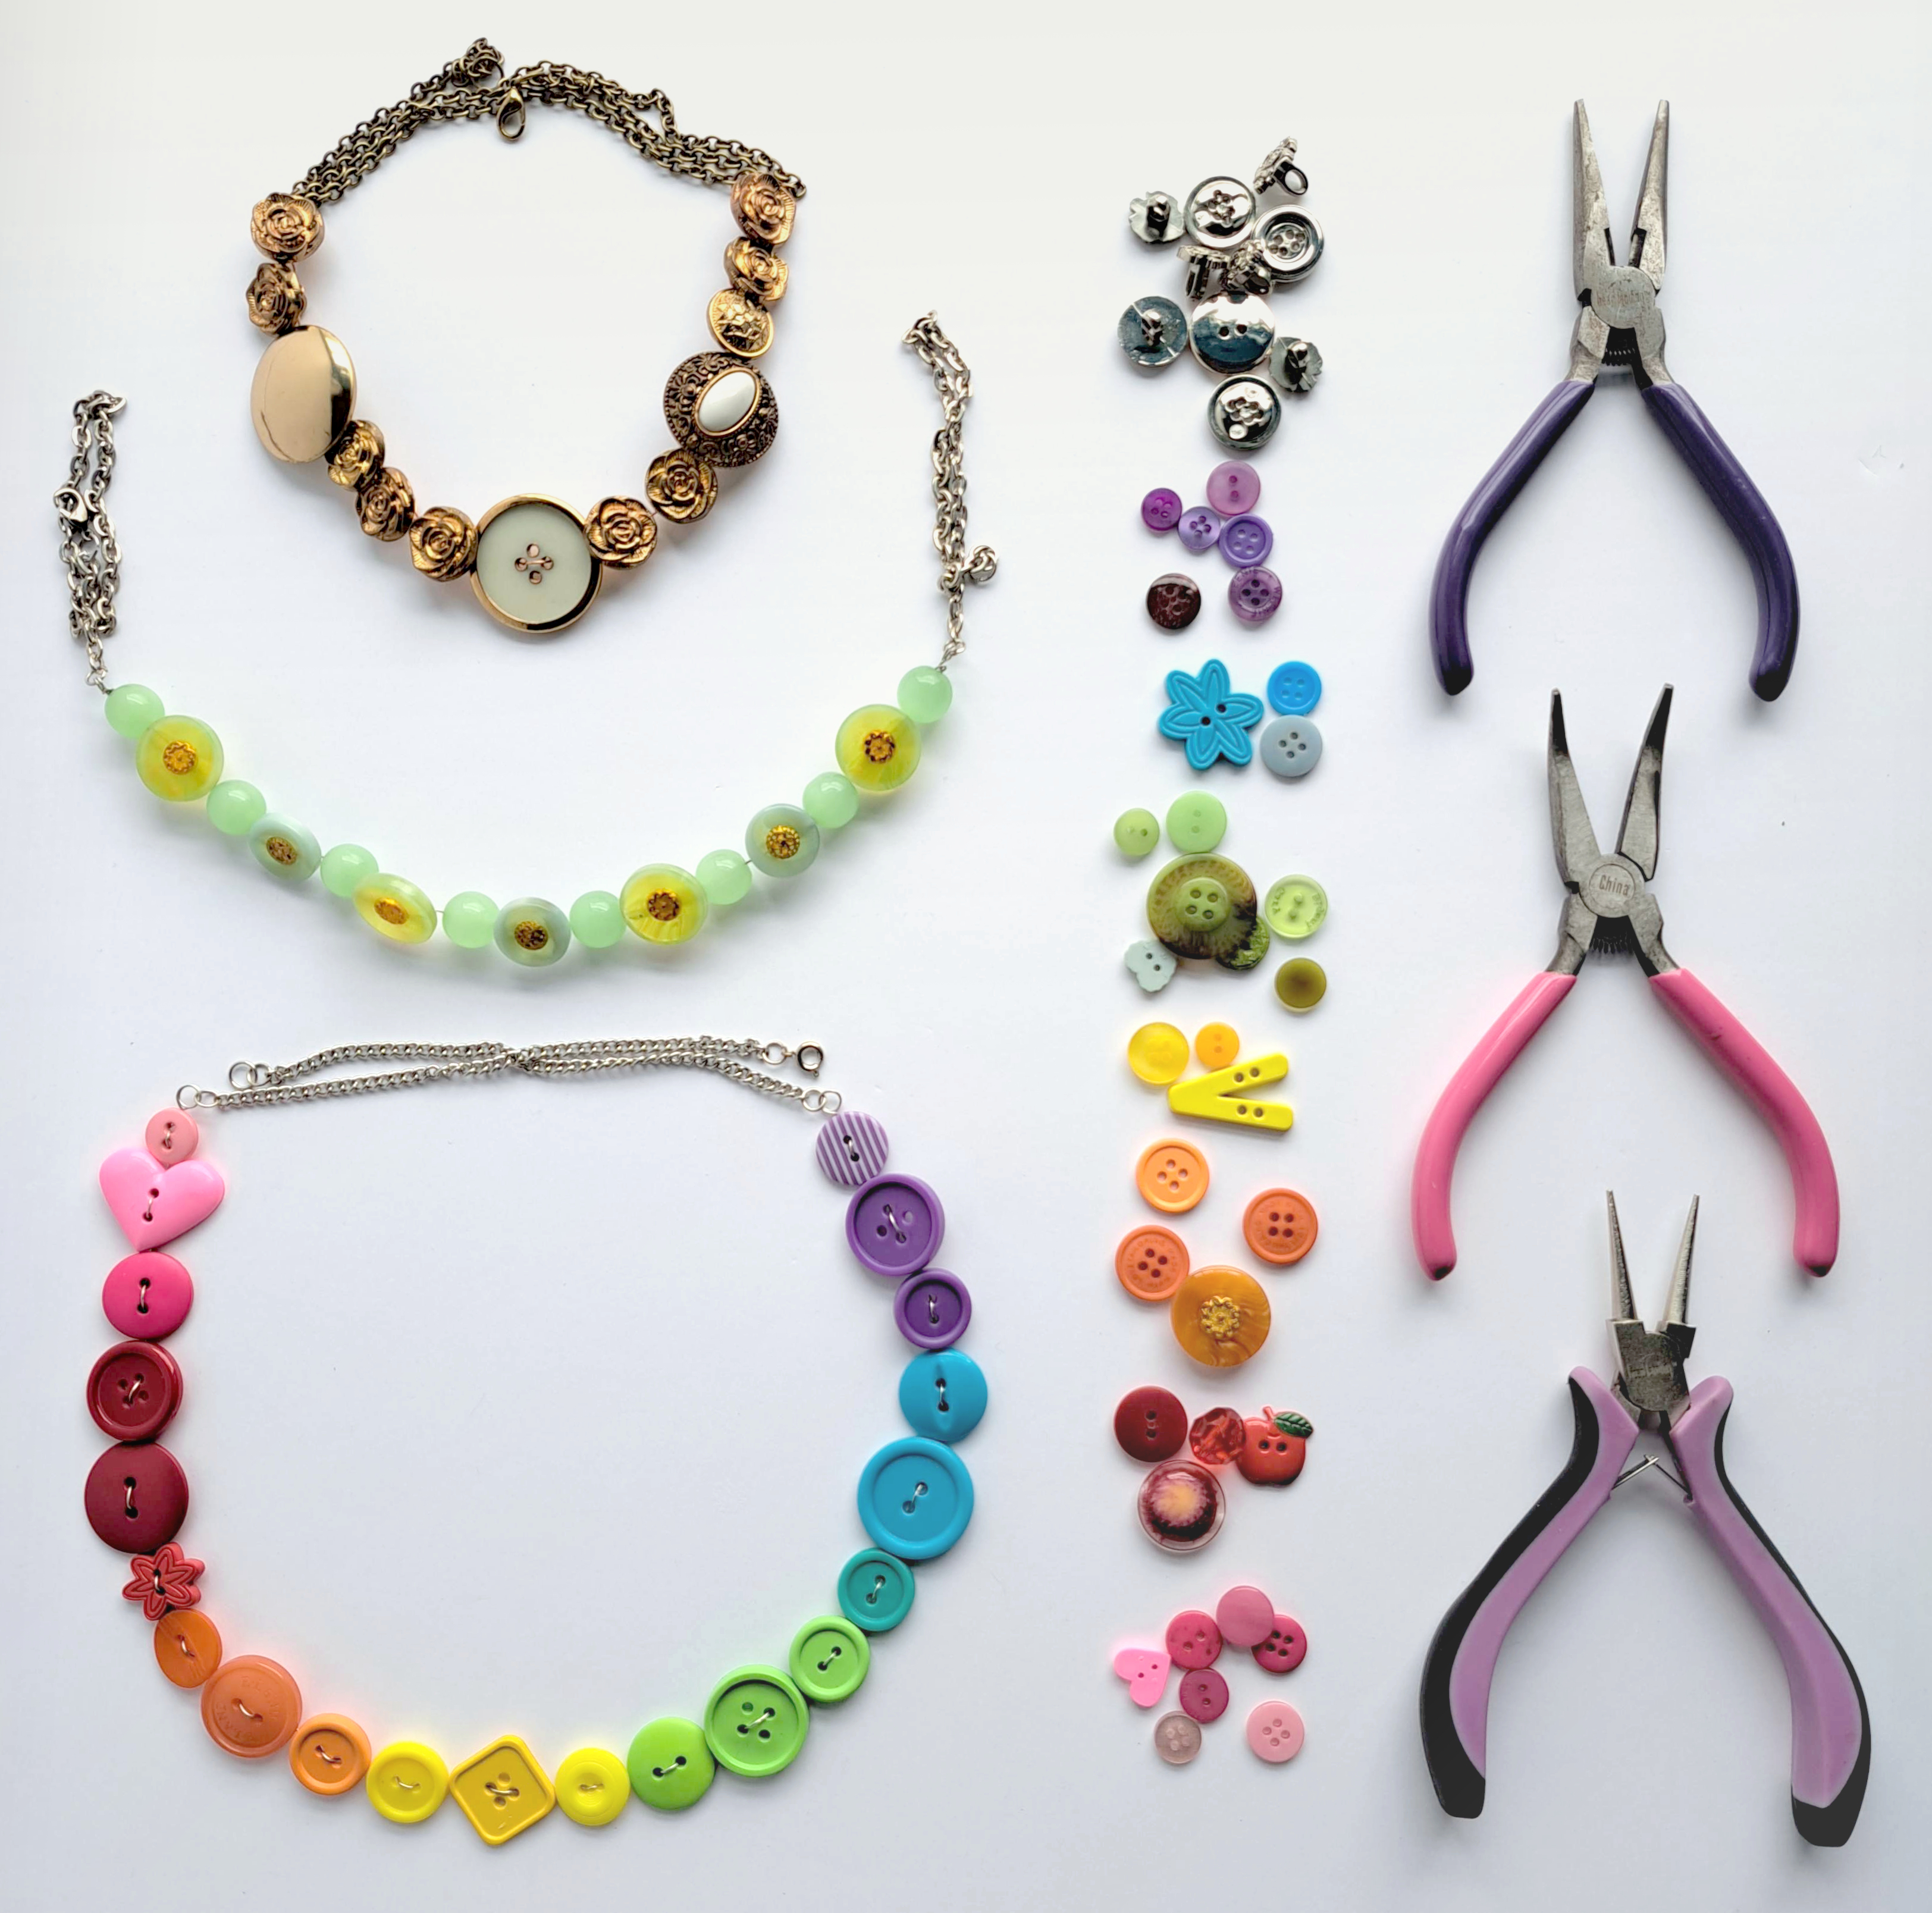 Three necklaces made of buttons, a line of colourful buttons and three pliers for jewelry making.